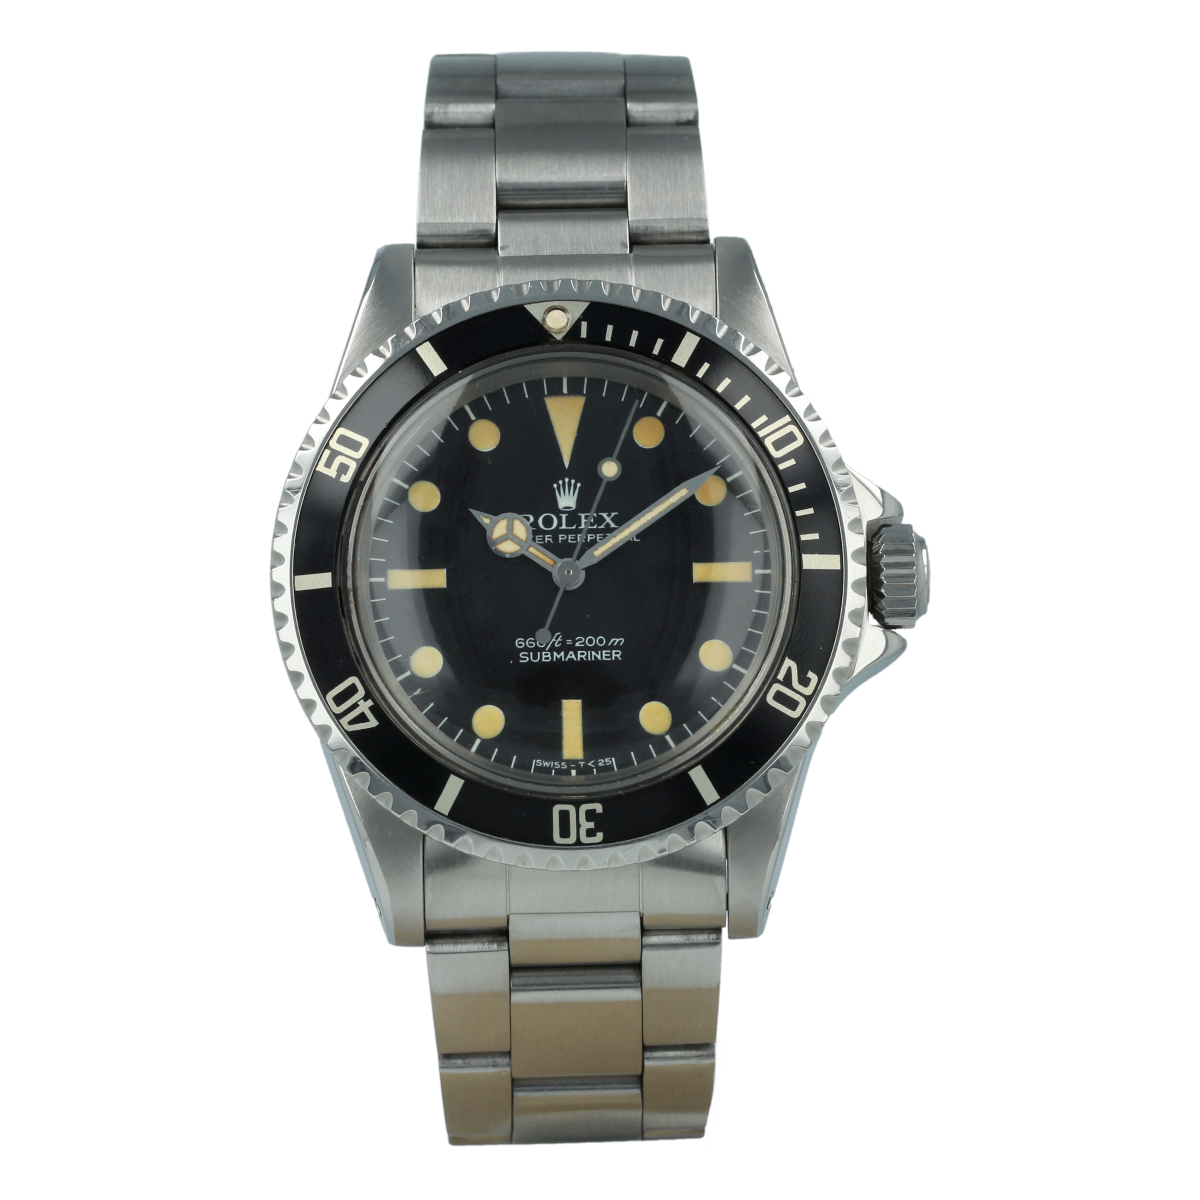 Rolex Oyster Perpetual Sea Dweller COMEX N°2049 Referenc… | Drouot.com